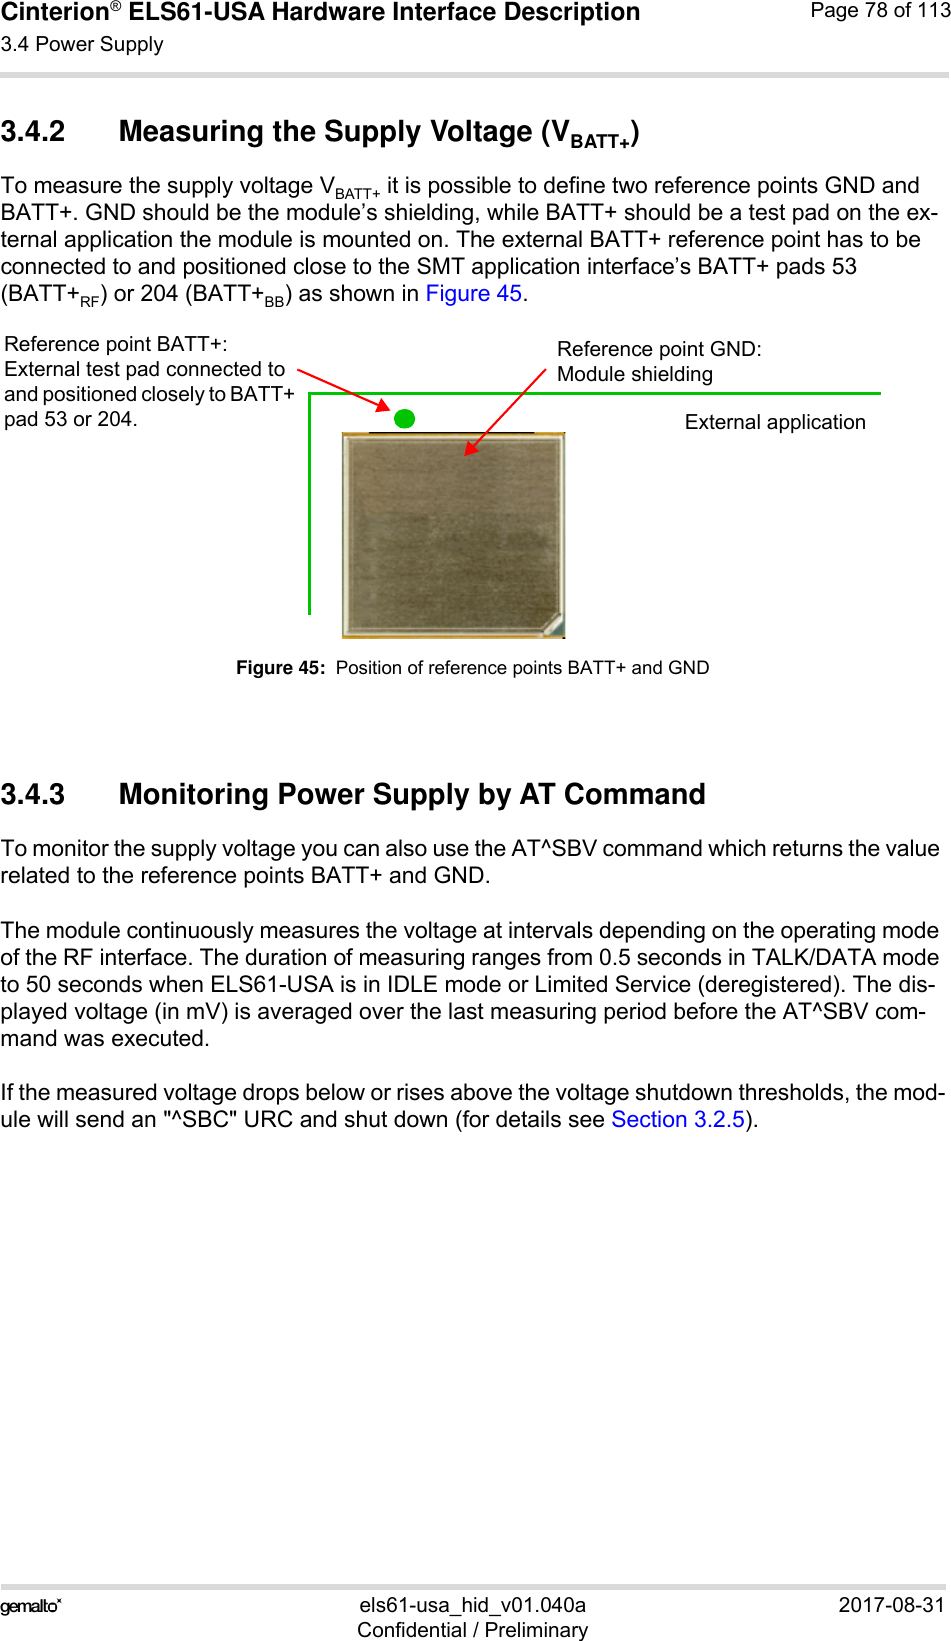 Cinterion® ELS61-USA Hardware Interface Description3.4 Power Supply83els61-usa_hid_v01.040a 2017-08-31Confidential / PreliminaryPage 78 of 1133.4.2 Measuring the Supply Voltage (VBATT+)To measure the supply voltage VBATT+ it is possible to define two reference points GND and BATT+. GND should be the module’s shielding, while BATT+ should be a test pad on the ex-ternal application the module is mounted on. The external BATT+ reference point has to be connected to and positioned close to the SMT application interface’s BATT+ pads 53 (BATT+RF) or 204 (BATT+BB) as shown in Figure 45.Figure 45:  Position of reference points BATT+ and GND3.4.3 Monitoring Power Supply by AT CommandTo monitor the supply voltage you can also use the AT^SBV command which returns the value related to the reference points BATT+ and GND. The module continuously measures the voltage at intervals depending on the operating mode of the RF interface. The duration of measuring ranges from 0.5 seconds in TALK/DATA mode to 50 seconds when ELS61-USA is in IDLE mode or Limited Service (deregistered). The dis-played voltage (in mV) is averaged over the last measuring period before the AT^SBV com-mand was executed. If the measured voltage drops below or rises above the voltage shutdown thresholds, the mod-ule will send an &quot;^SBC&quot; URC and shut down (for details see Section 3.2.5).Reference point GND:Module shieldingReference point BATT+:External test pad connected to and positioned closely to BATT+ pad 53 or 204. External application